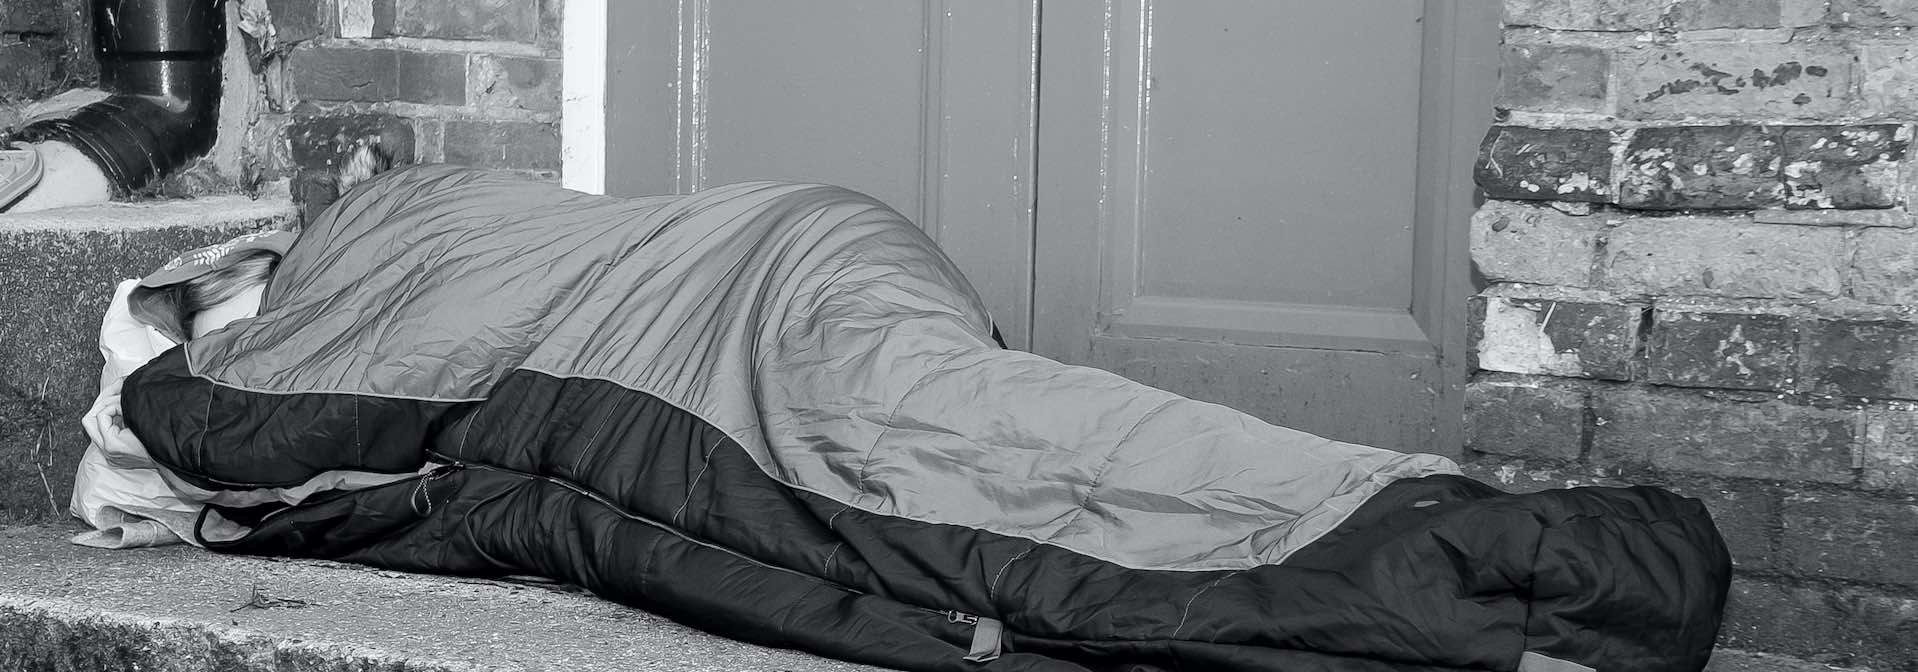 Homeless person lying in a sleeping bag in a doorway